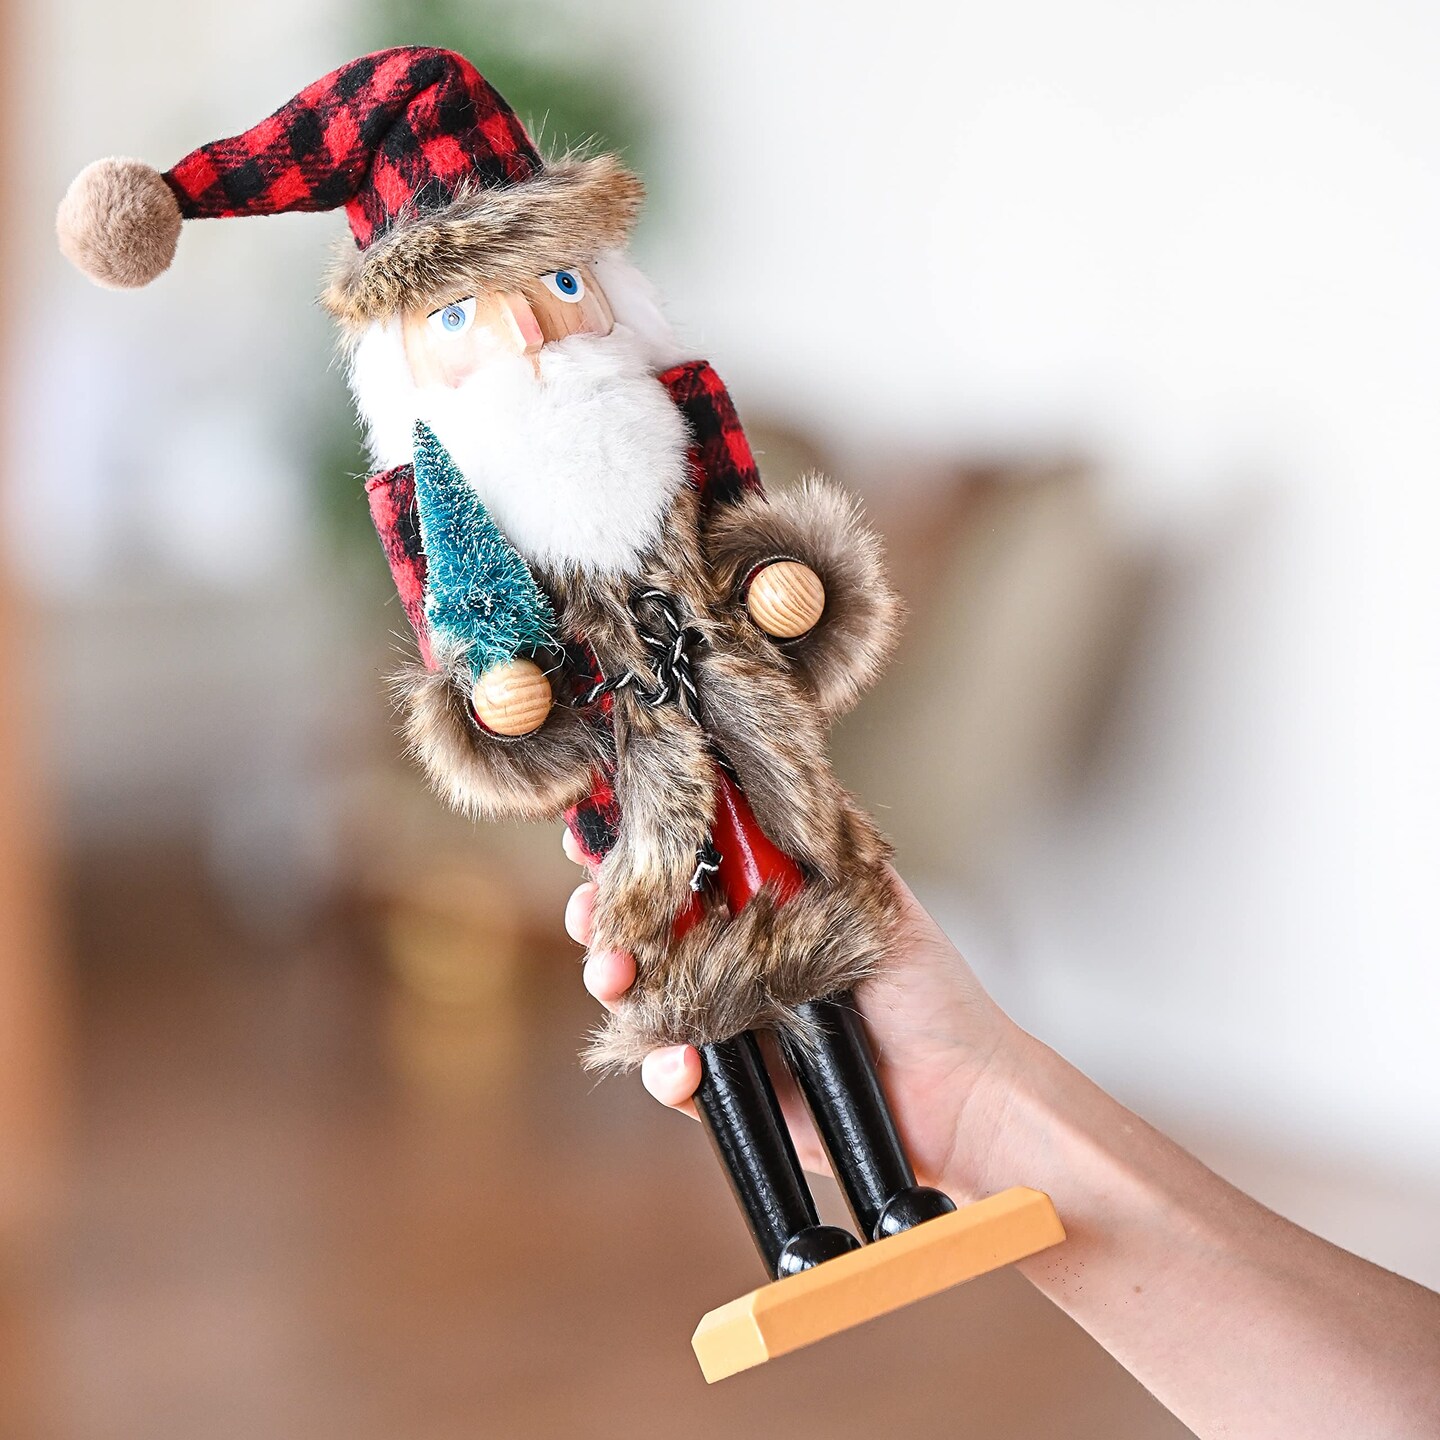 ORNATIVITY 15 in. Wooden Christmas Fisher Man Nutcracker - Red and